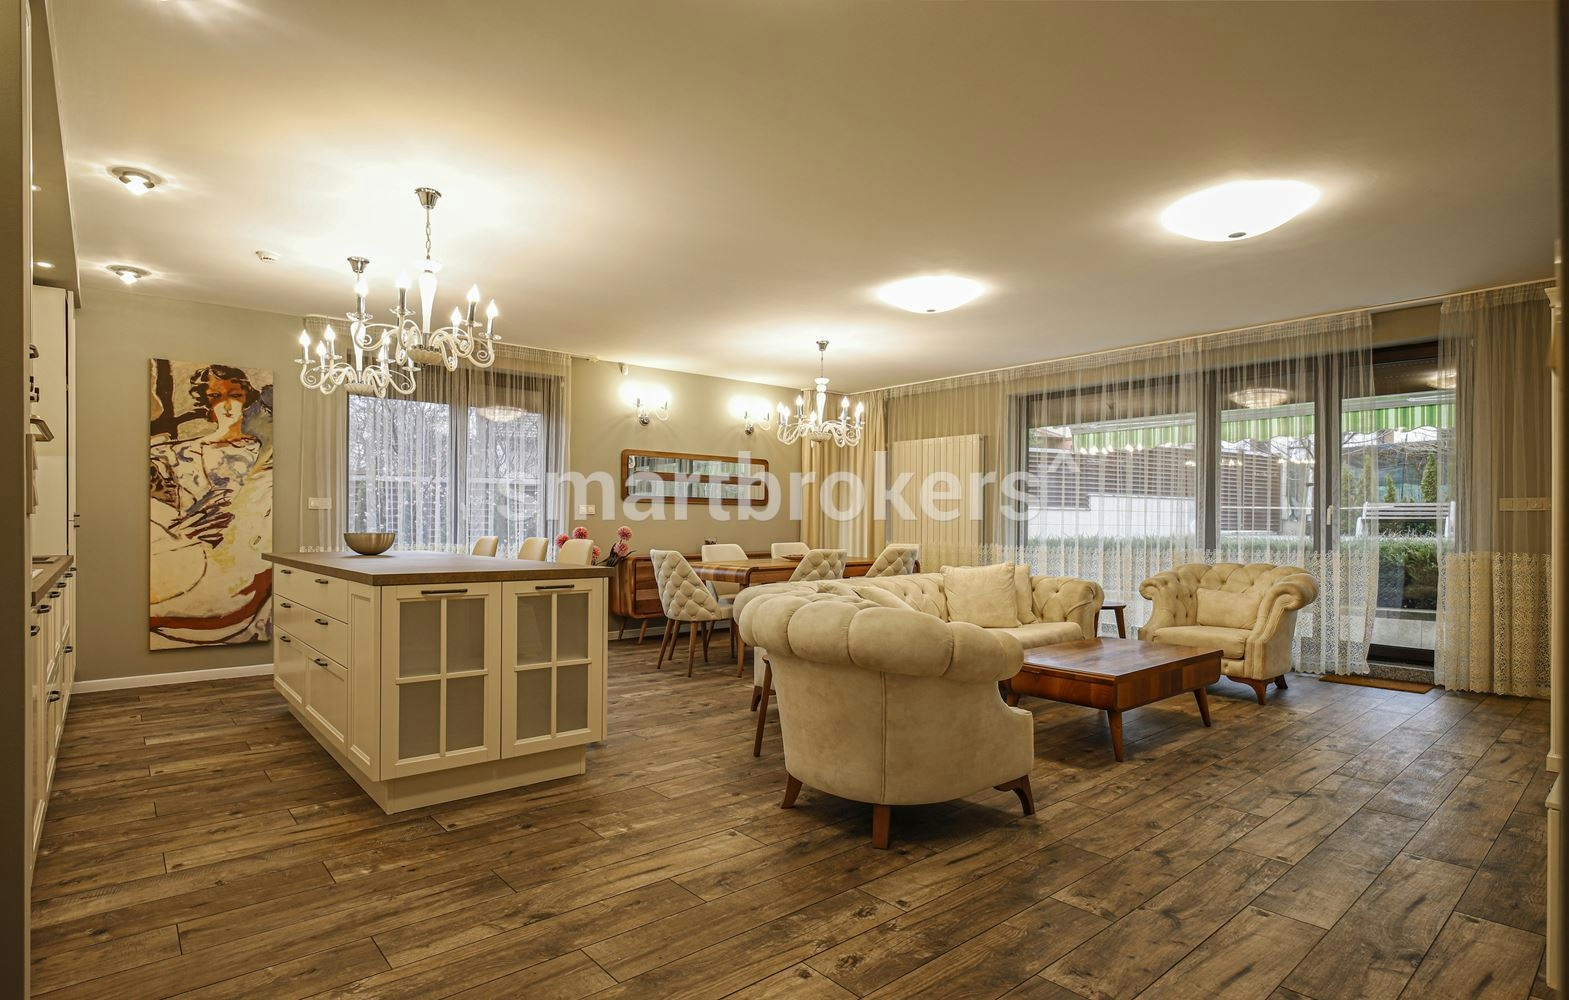 Three-bedroom apartment for rent in a gated complex in Simeonovo ​